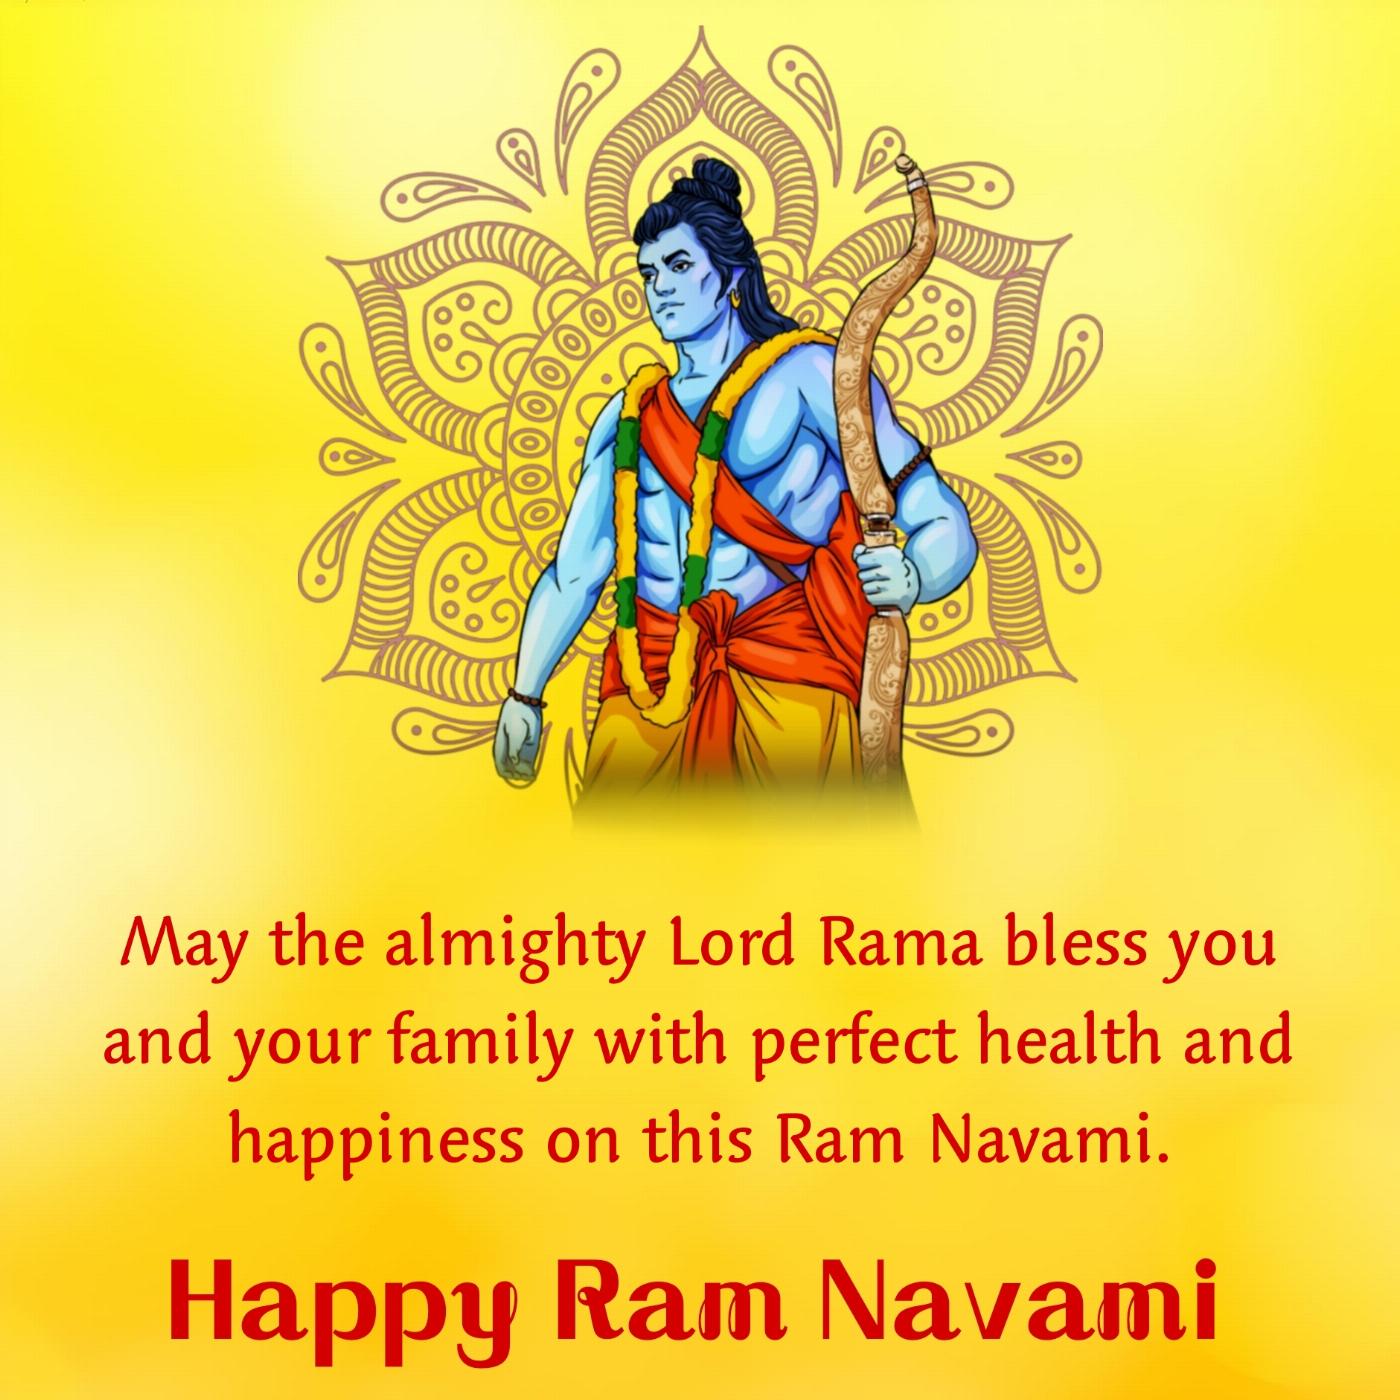 May the almighty Lord Rama bless you and your family